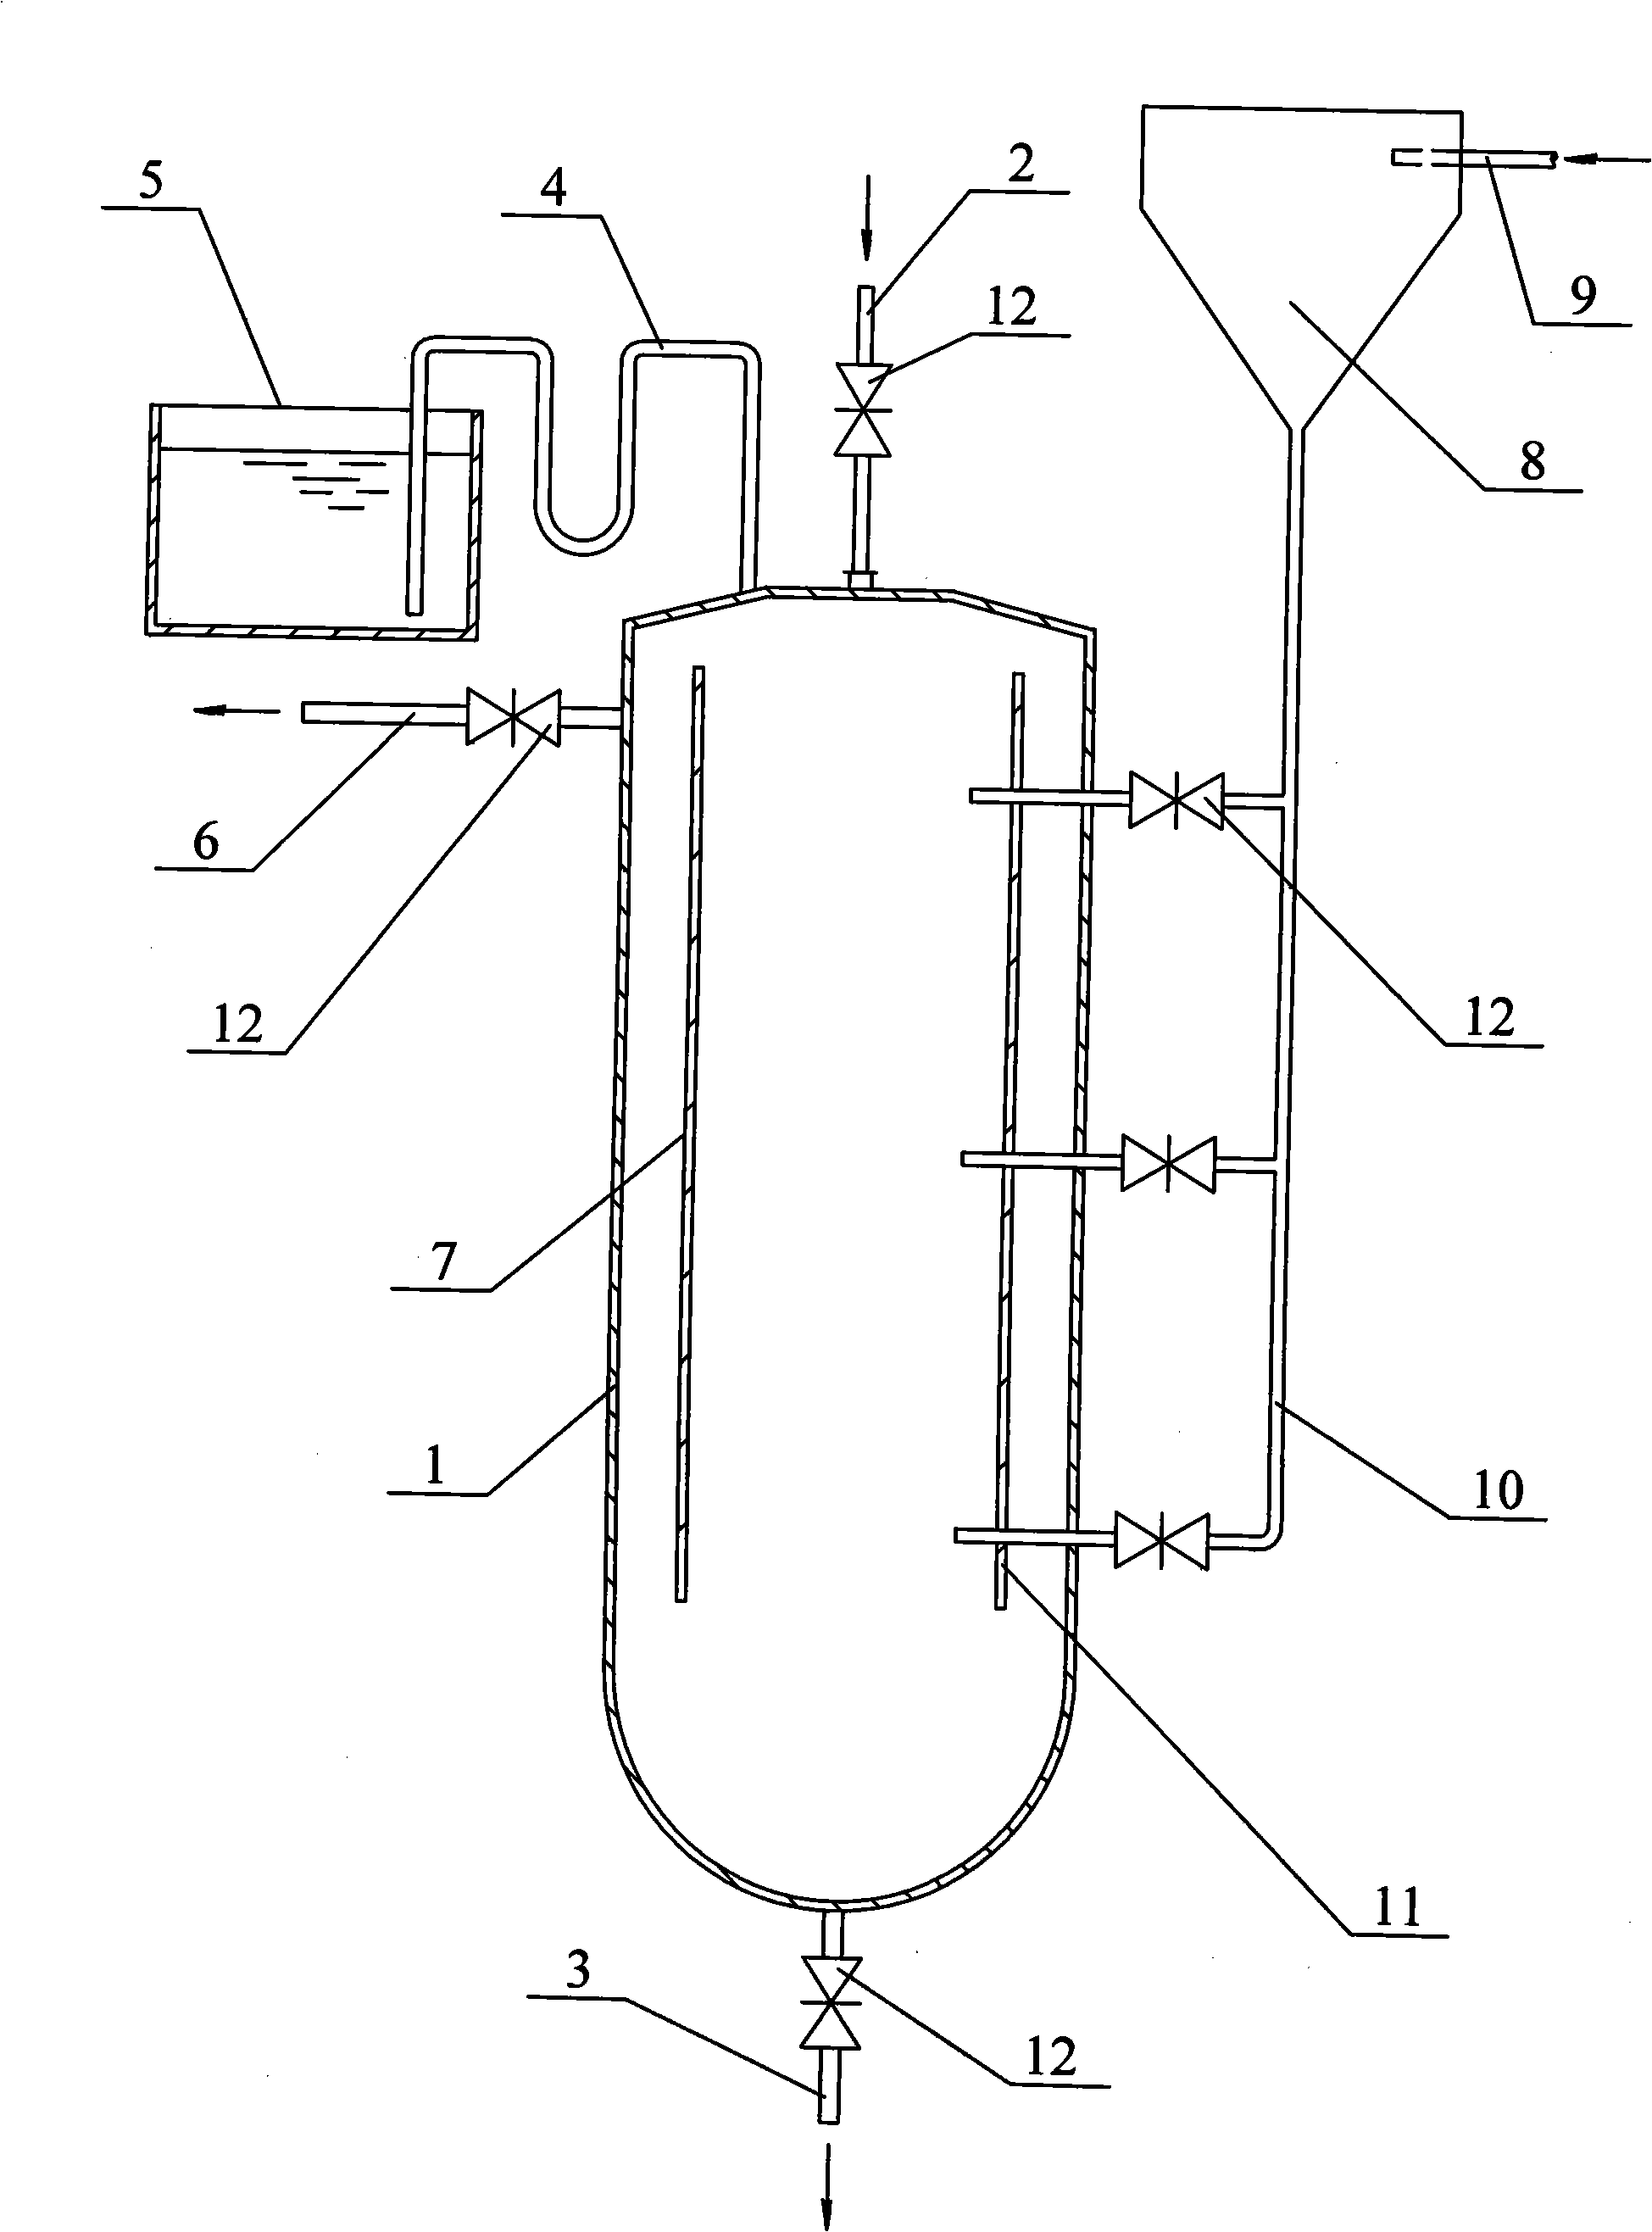 Device and method for conserving anaerobic particle sludge in beer industrial waste water treatment